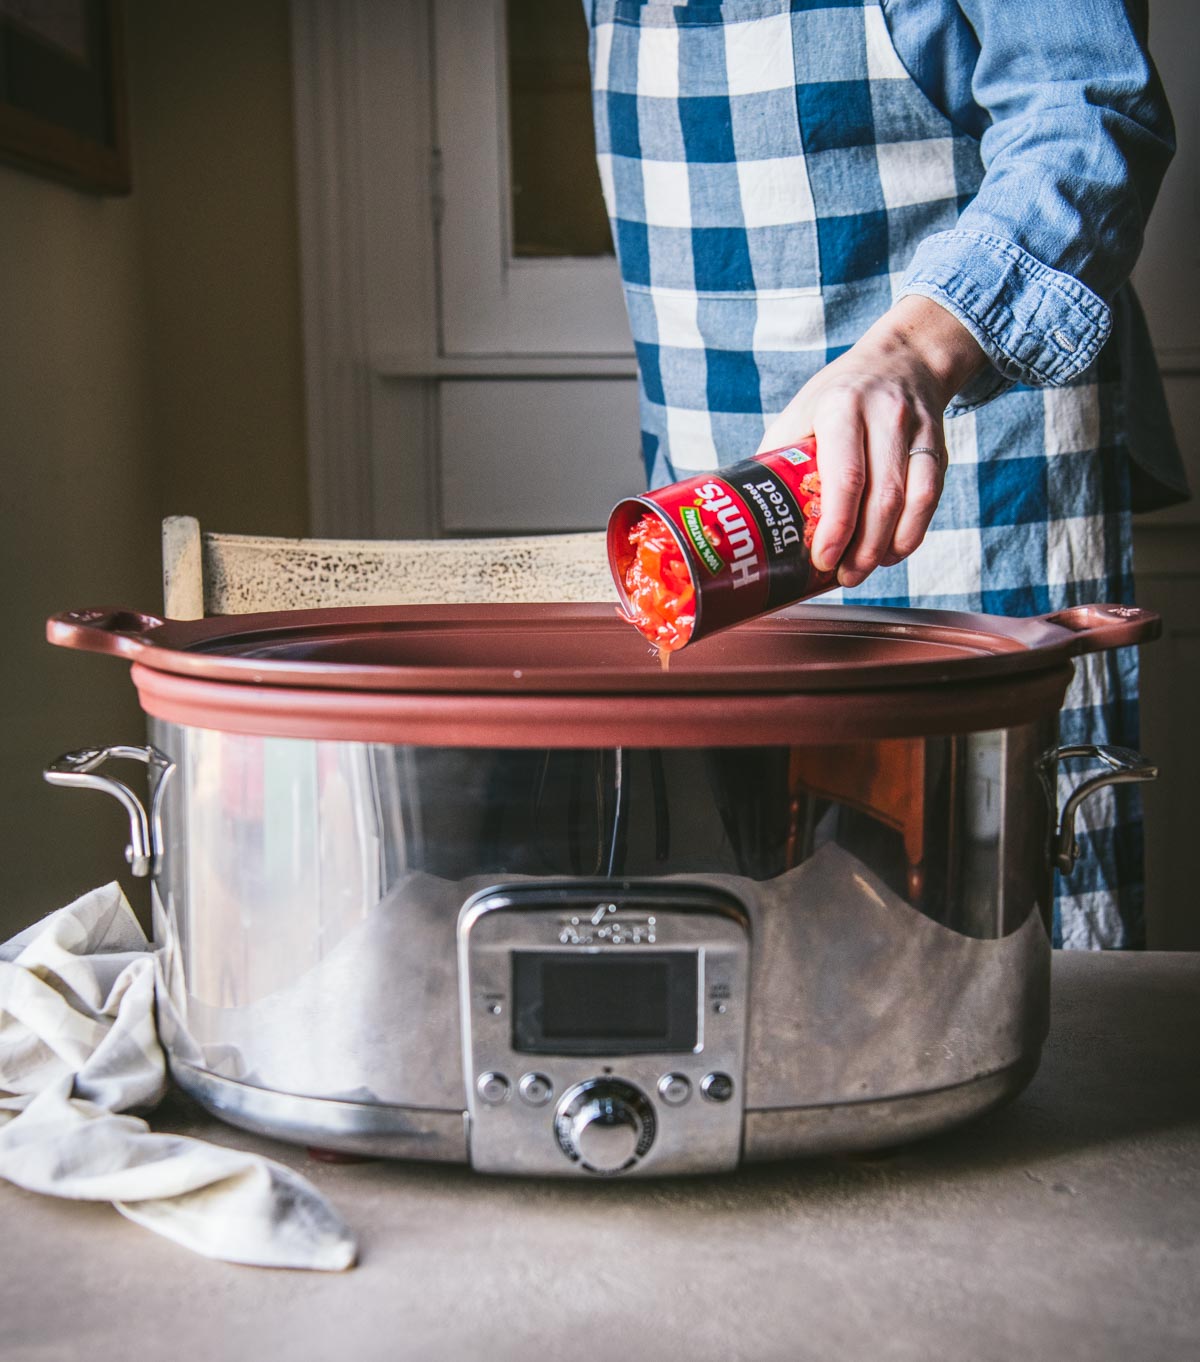 Adding fire roasted diced tomatoes to a slow cooker